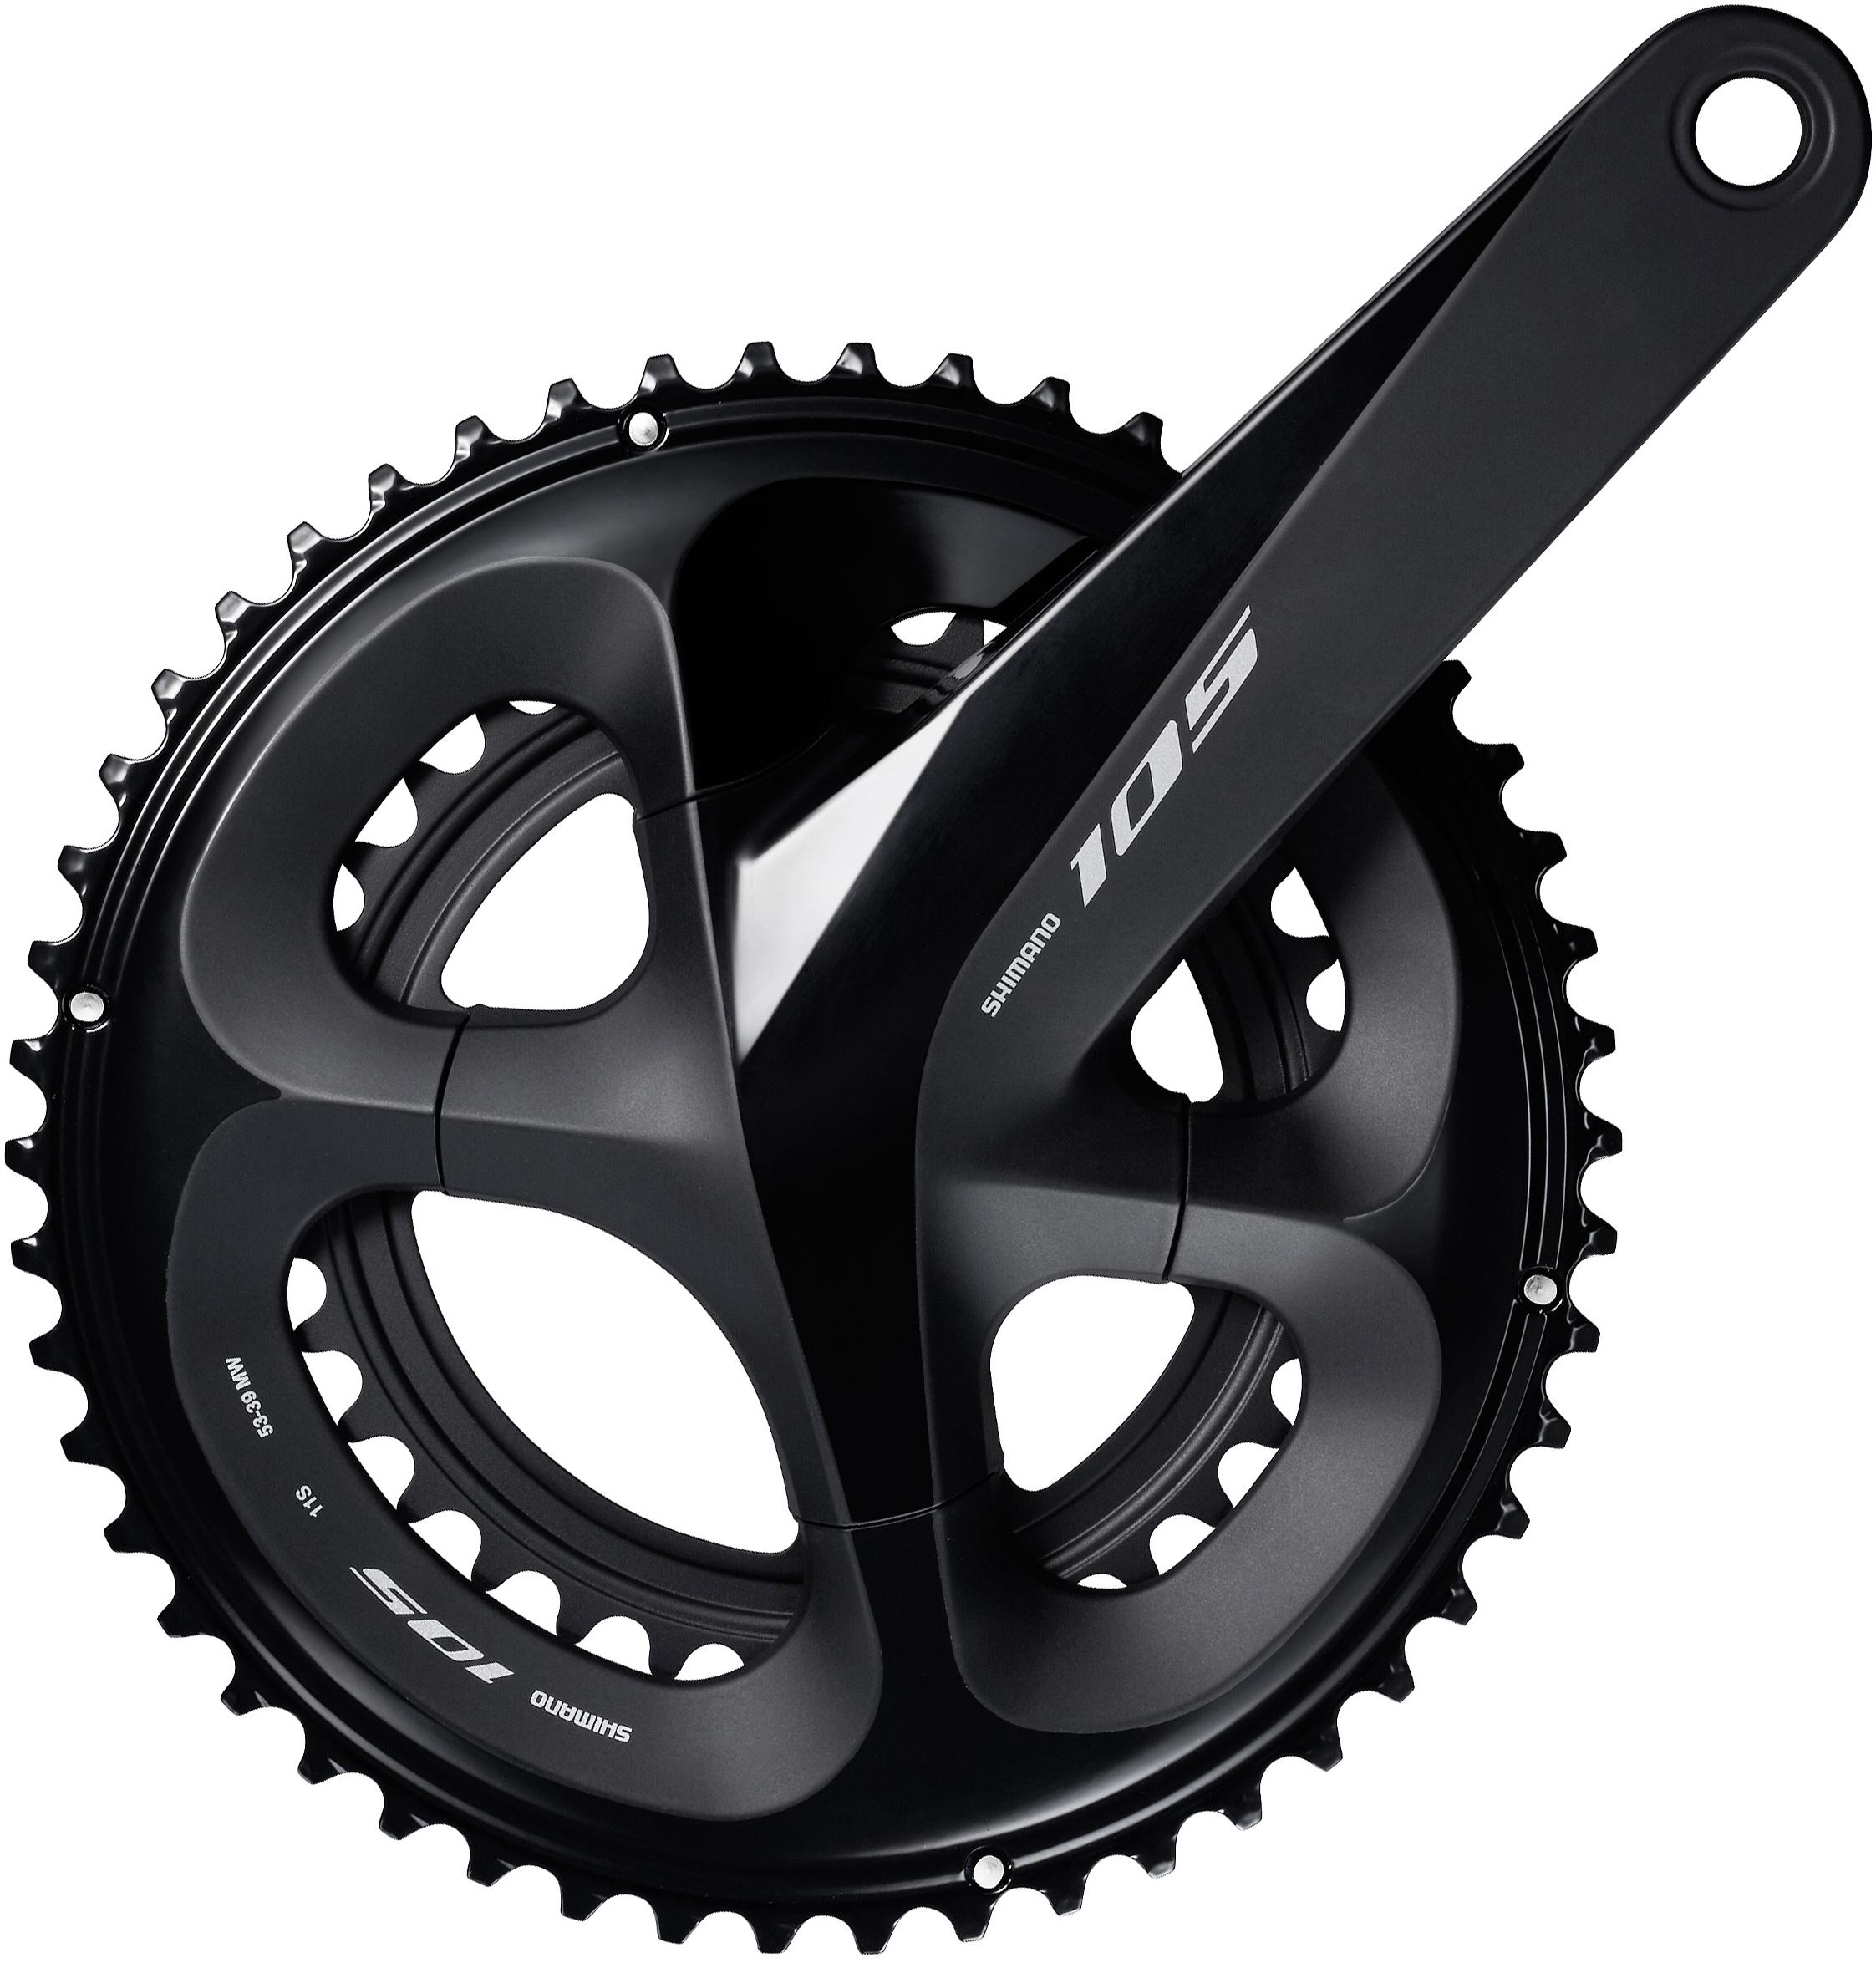 Shimano 105 R7000 11 Speed Compact Chainset - Black